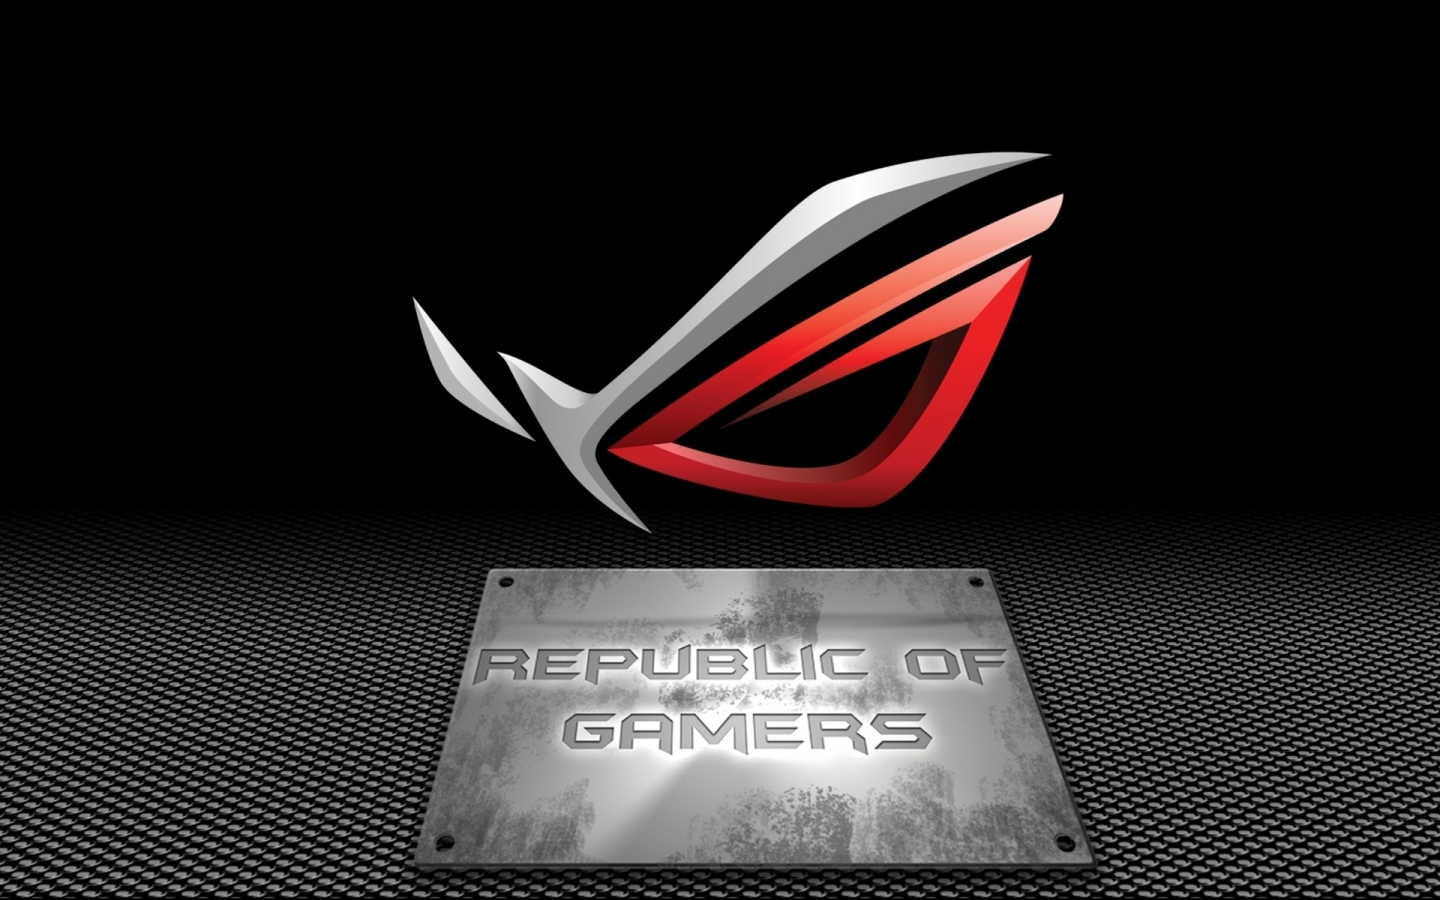 Republic of Gamers Asus for 1440 x 900 widescreen resolution